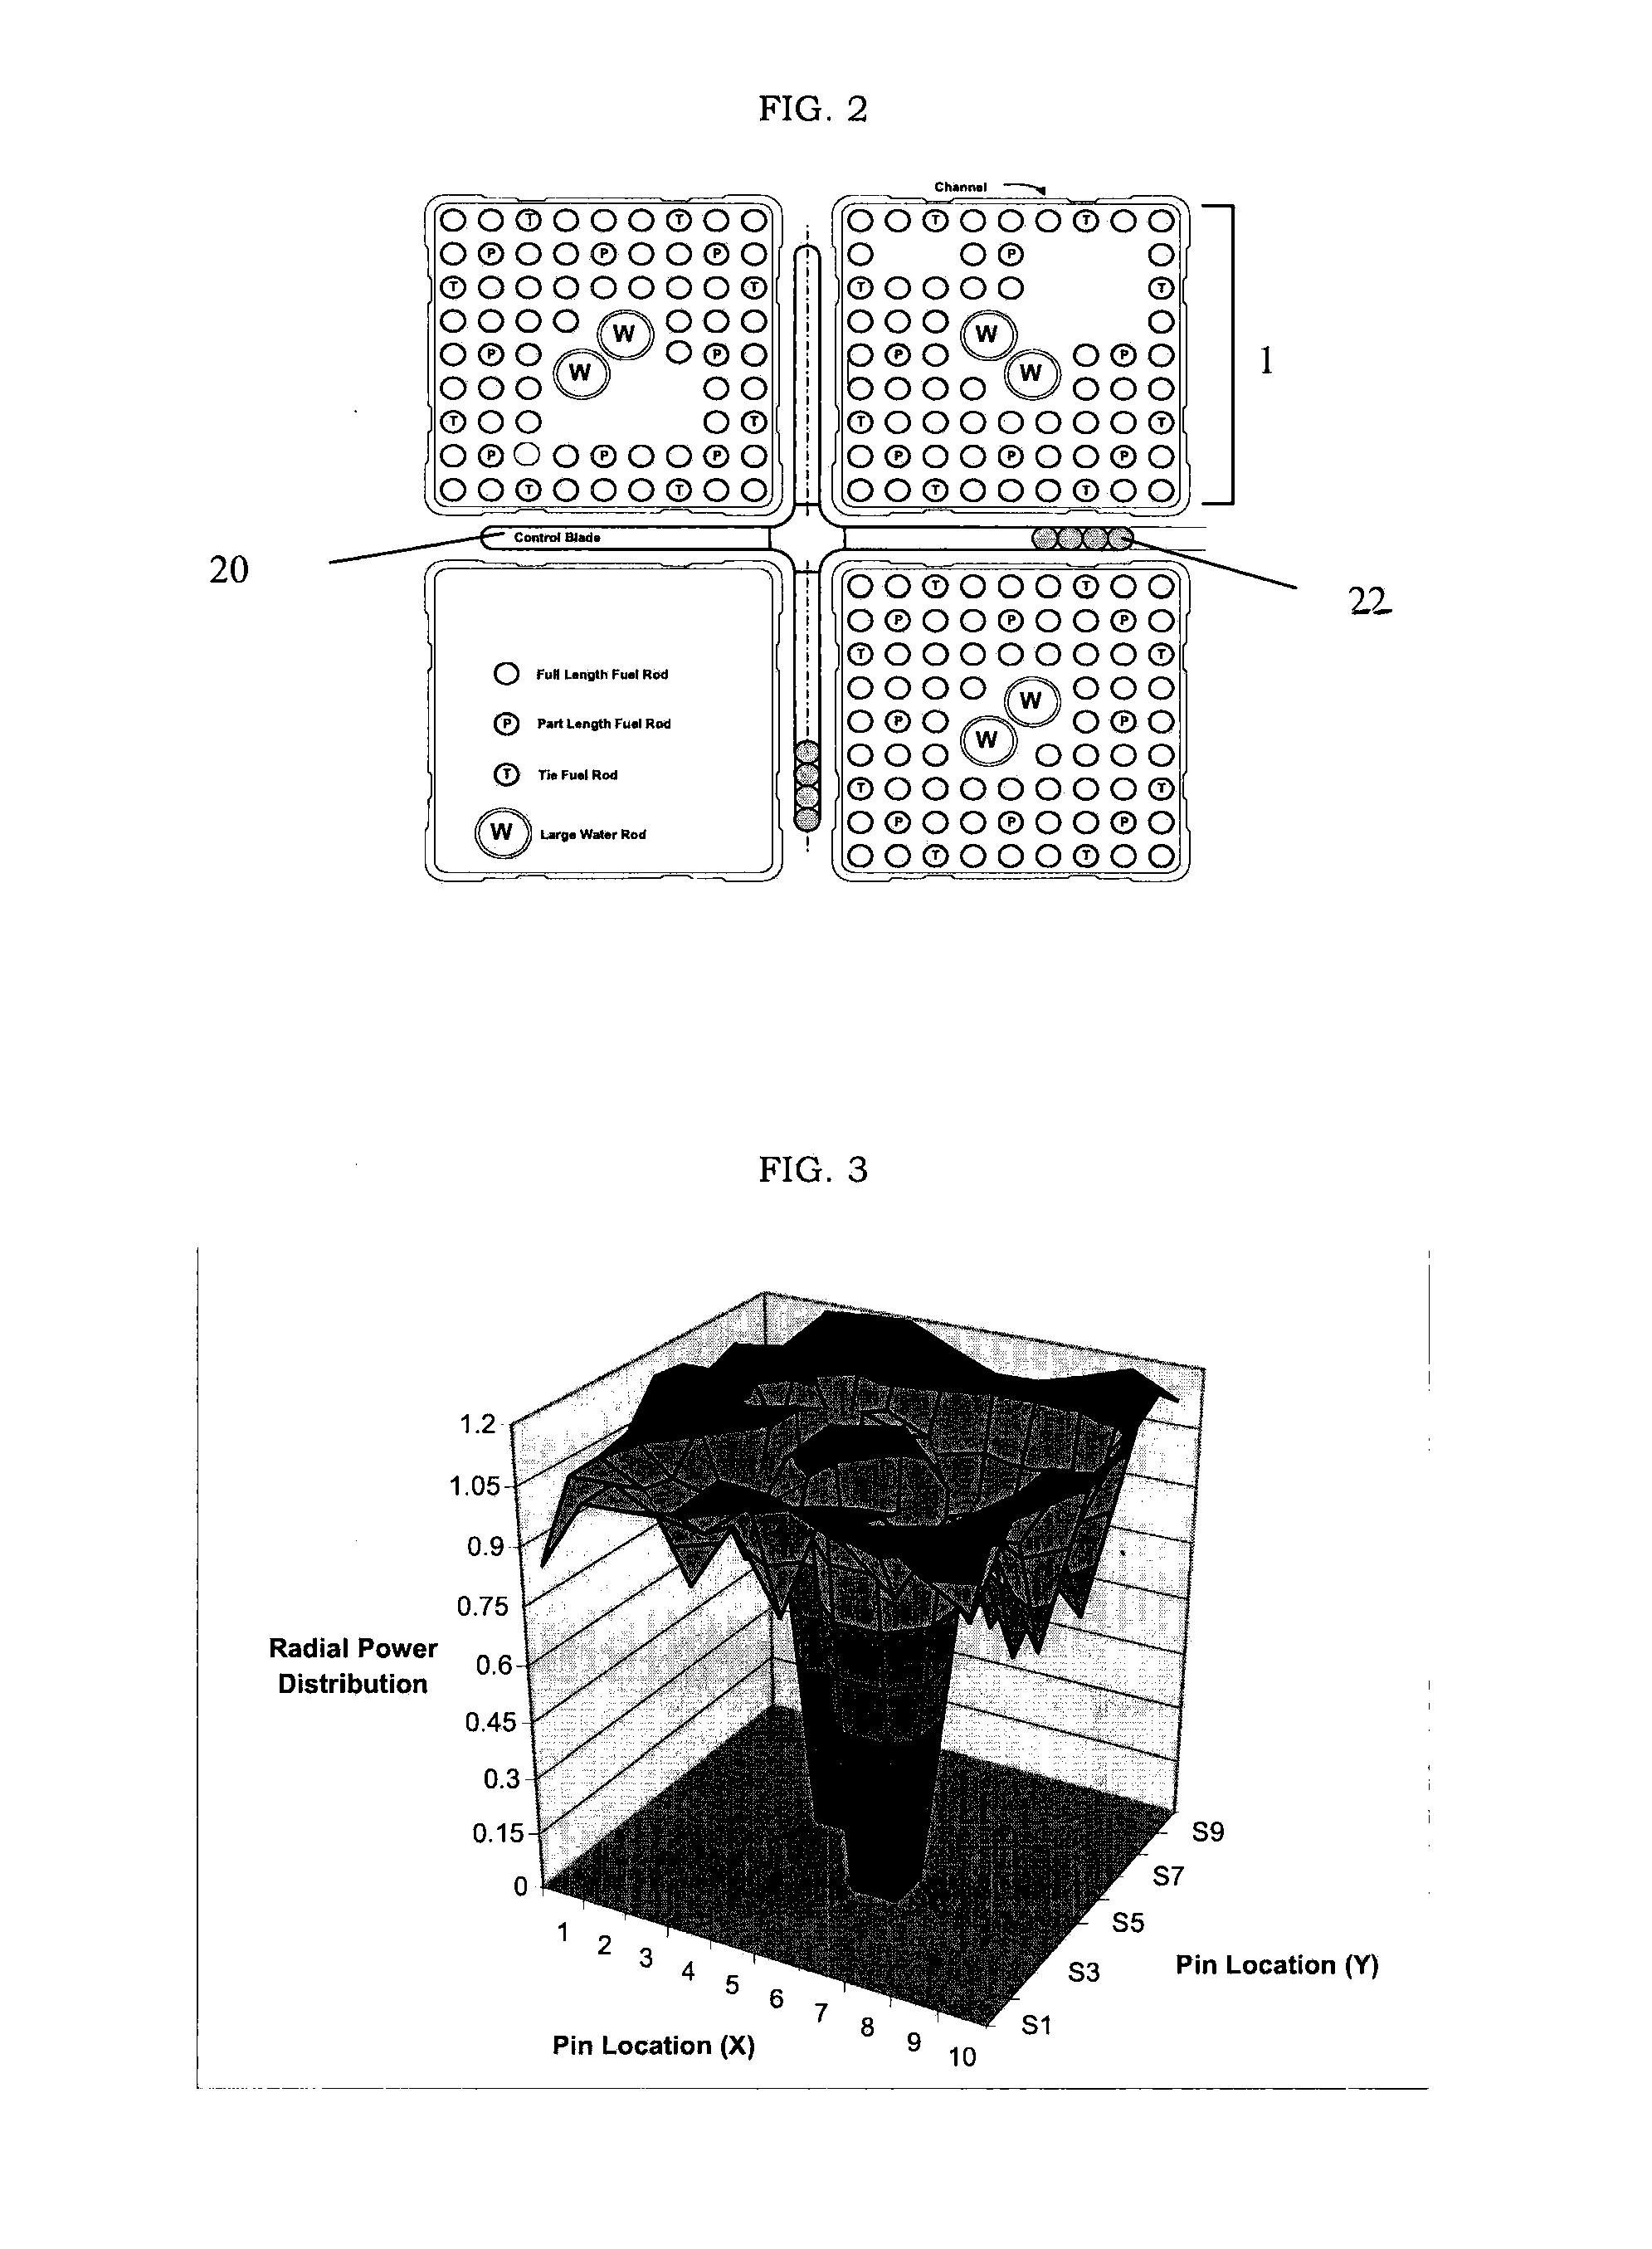 Method for pellet cladding interaction (PCI) evaluation and mitigation during bundle and core design process and operation